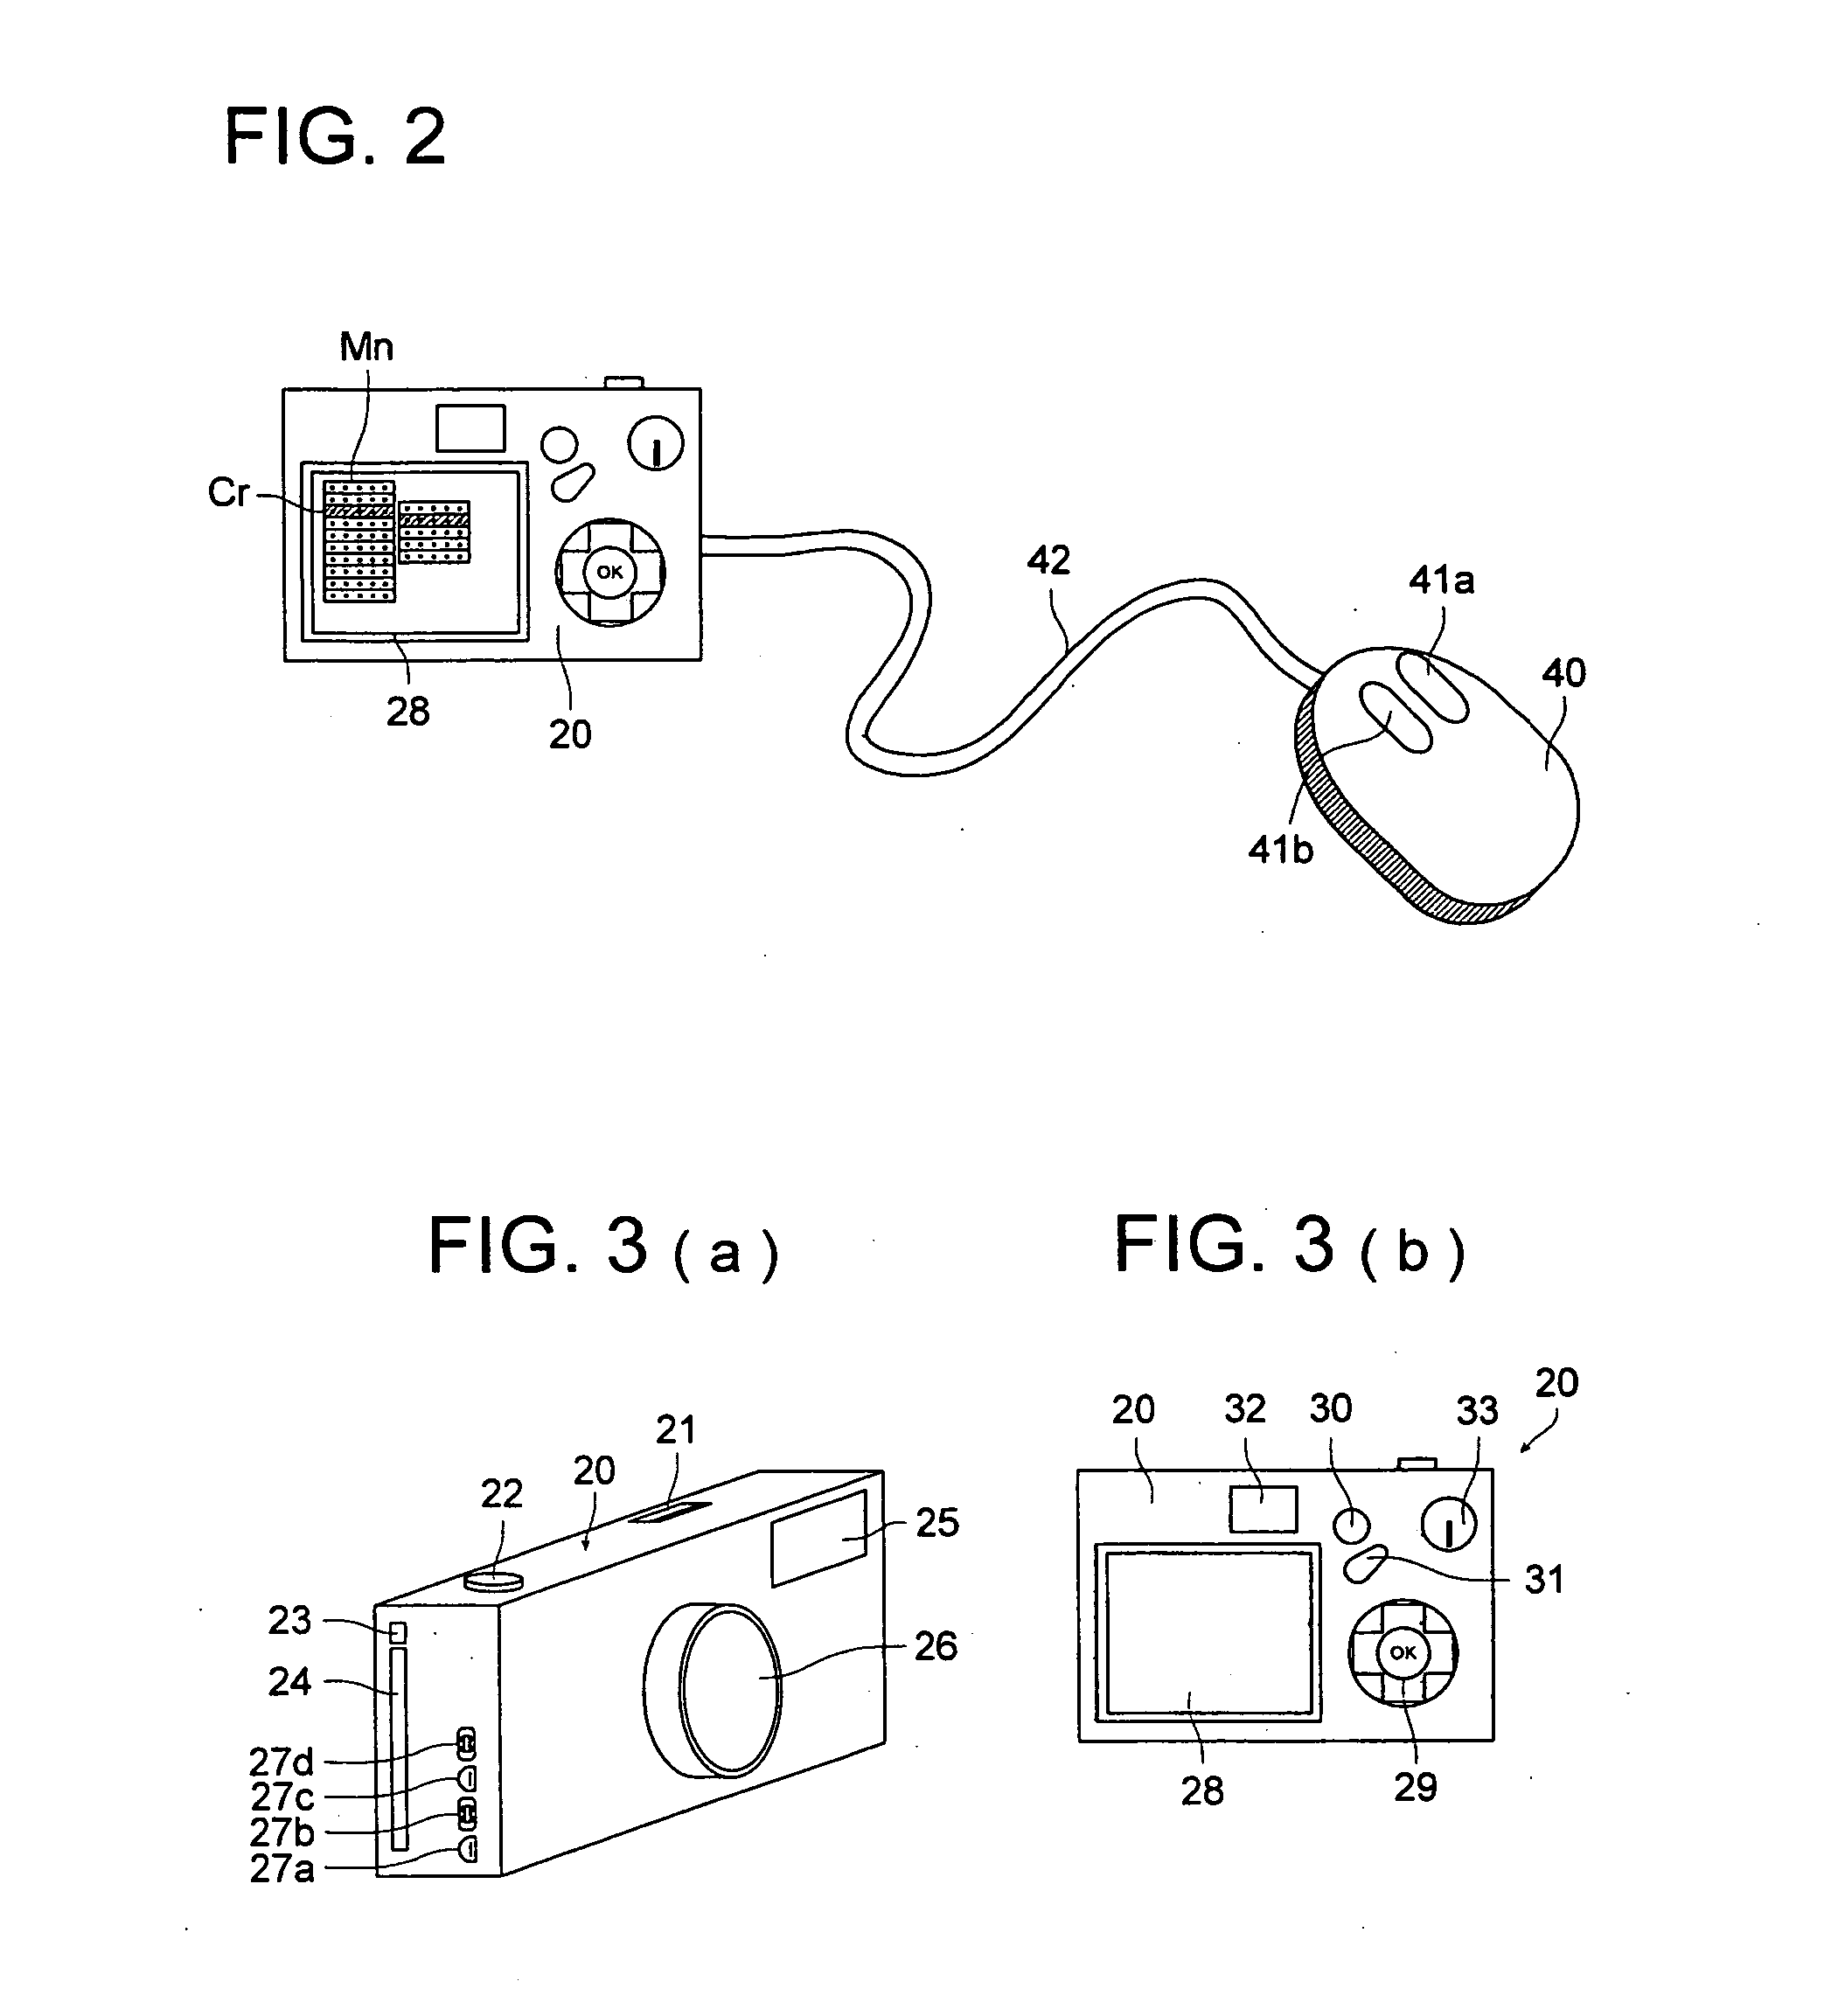 Photographing system providing image data to an external display apparatus